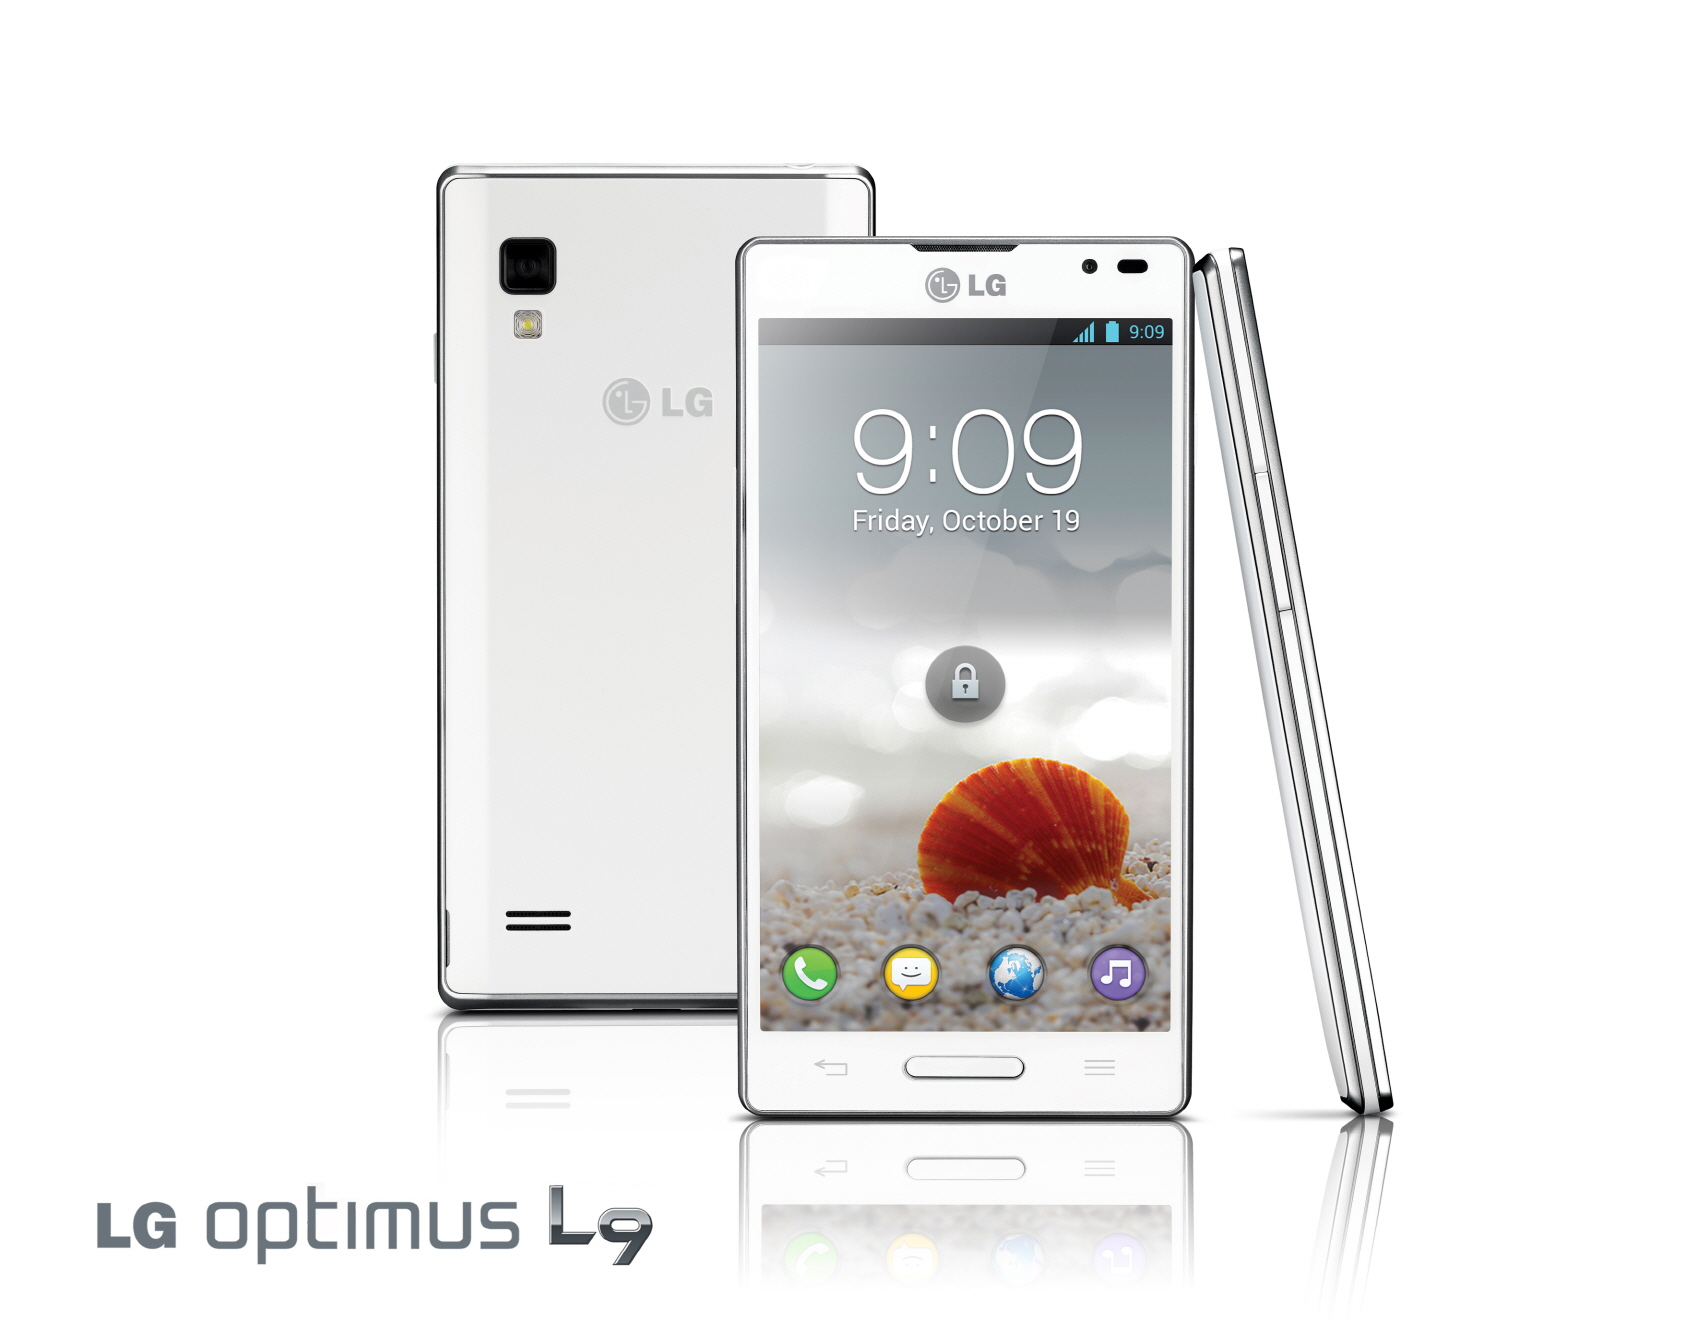 Rear, front and side views of LG Optimus L9